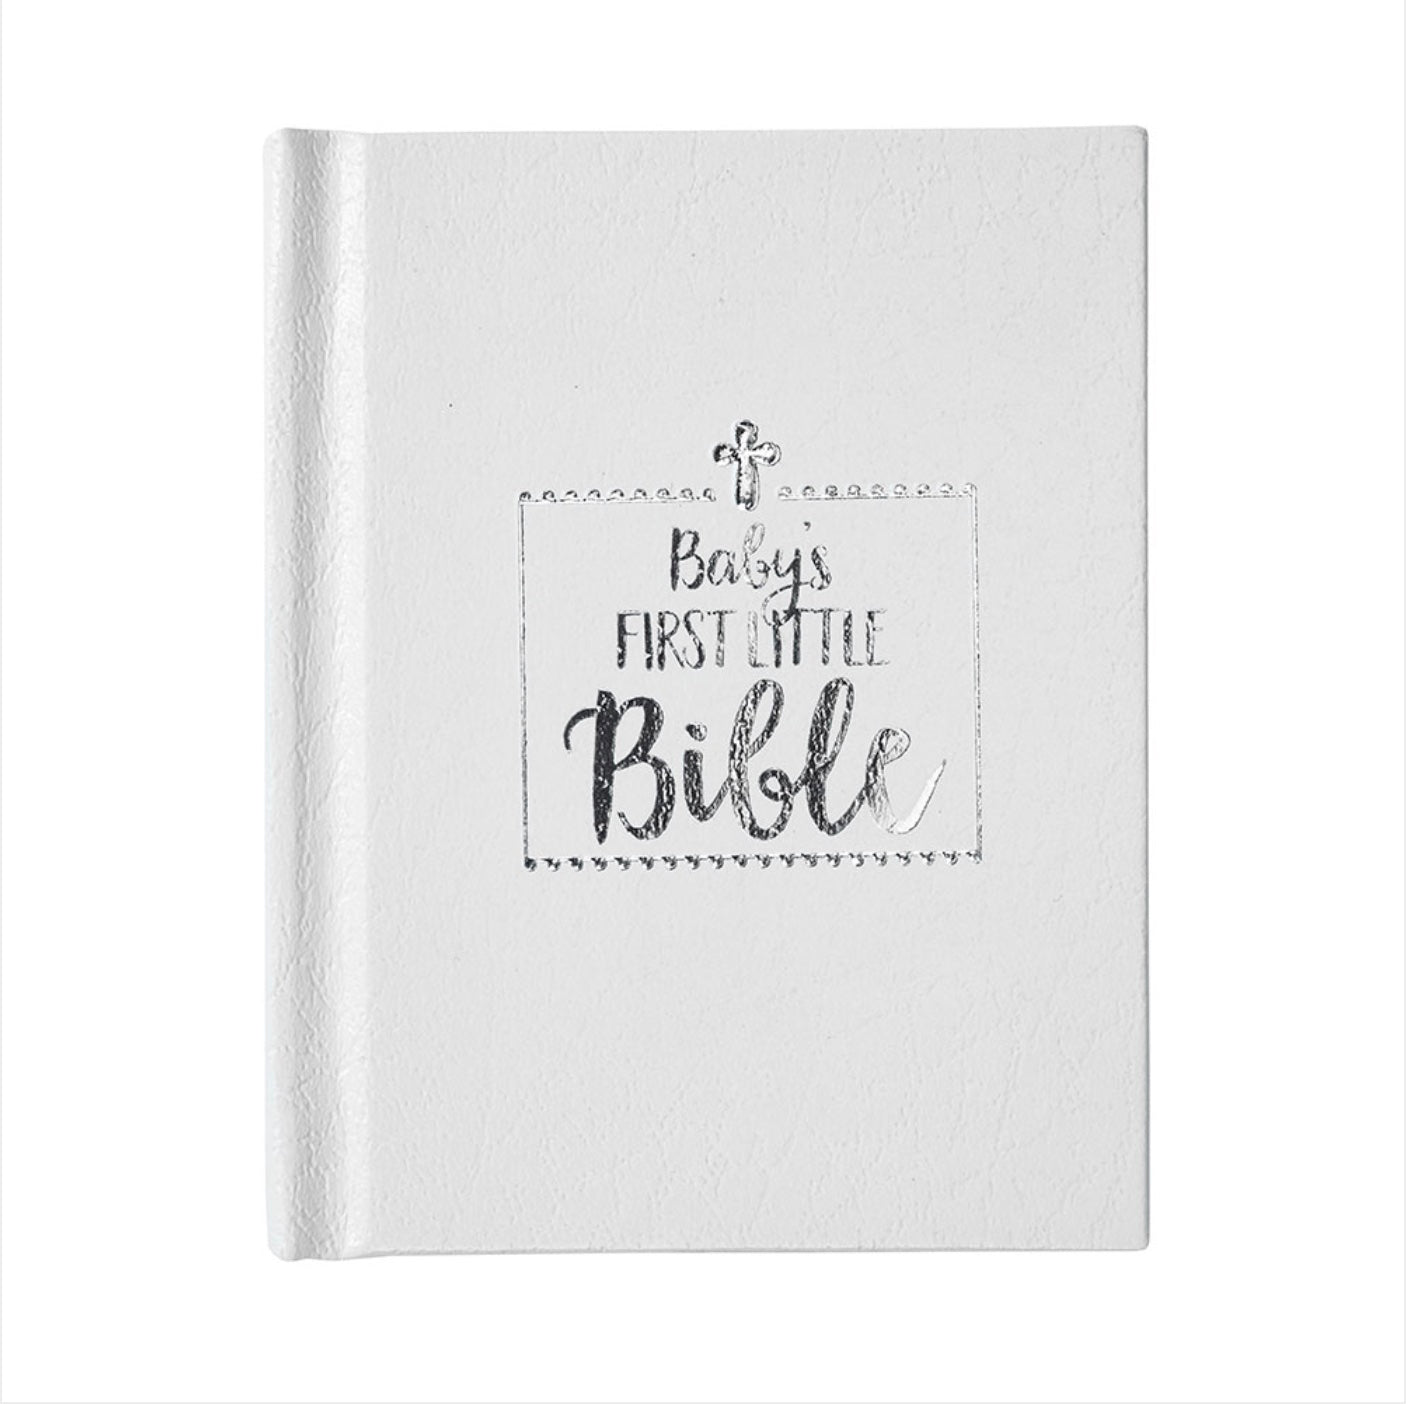 Baby's First Little Bible - White